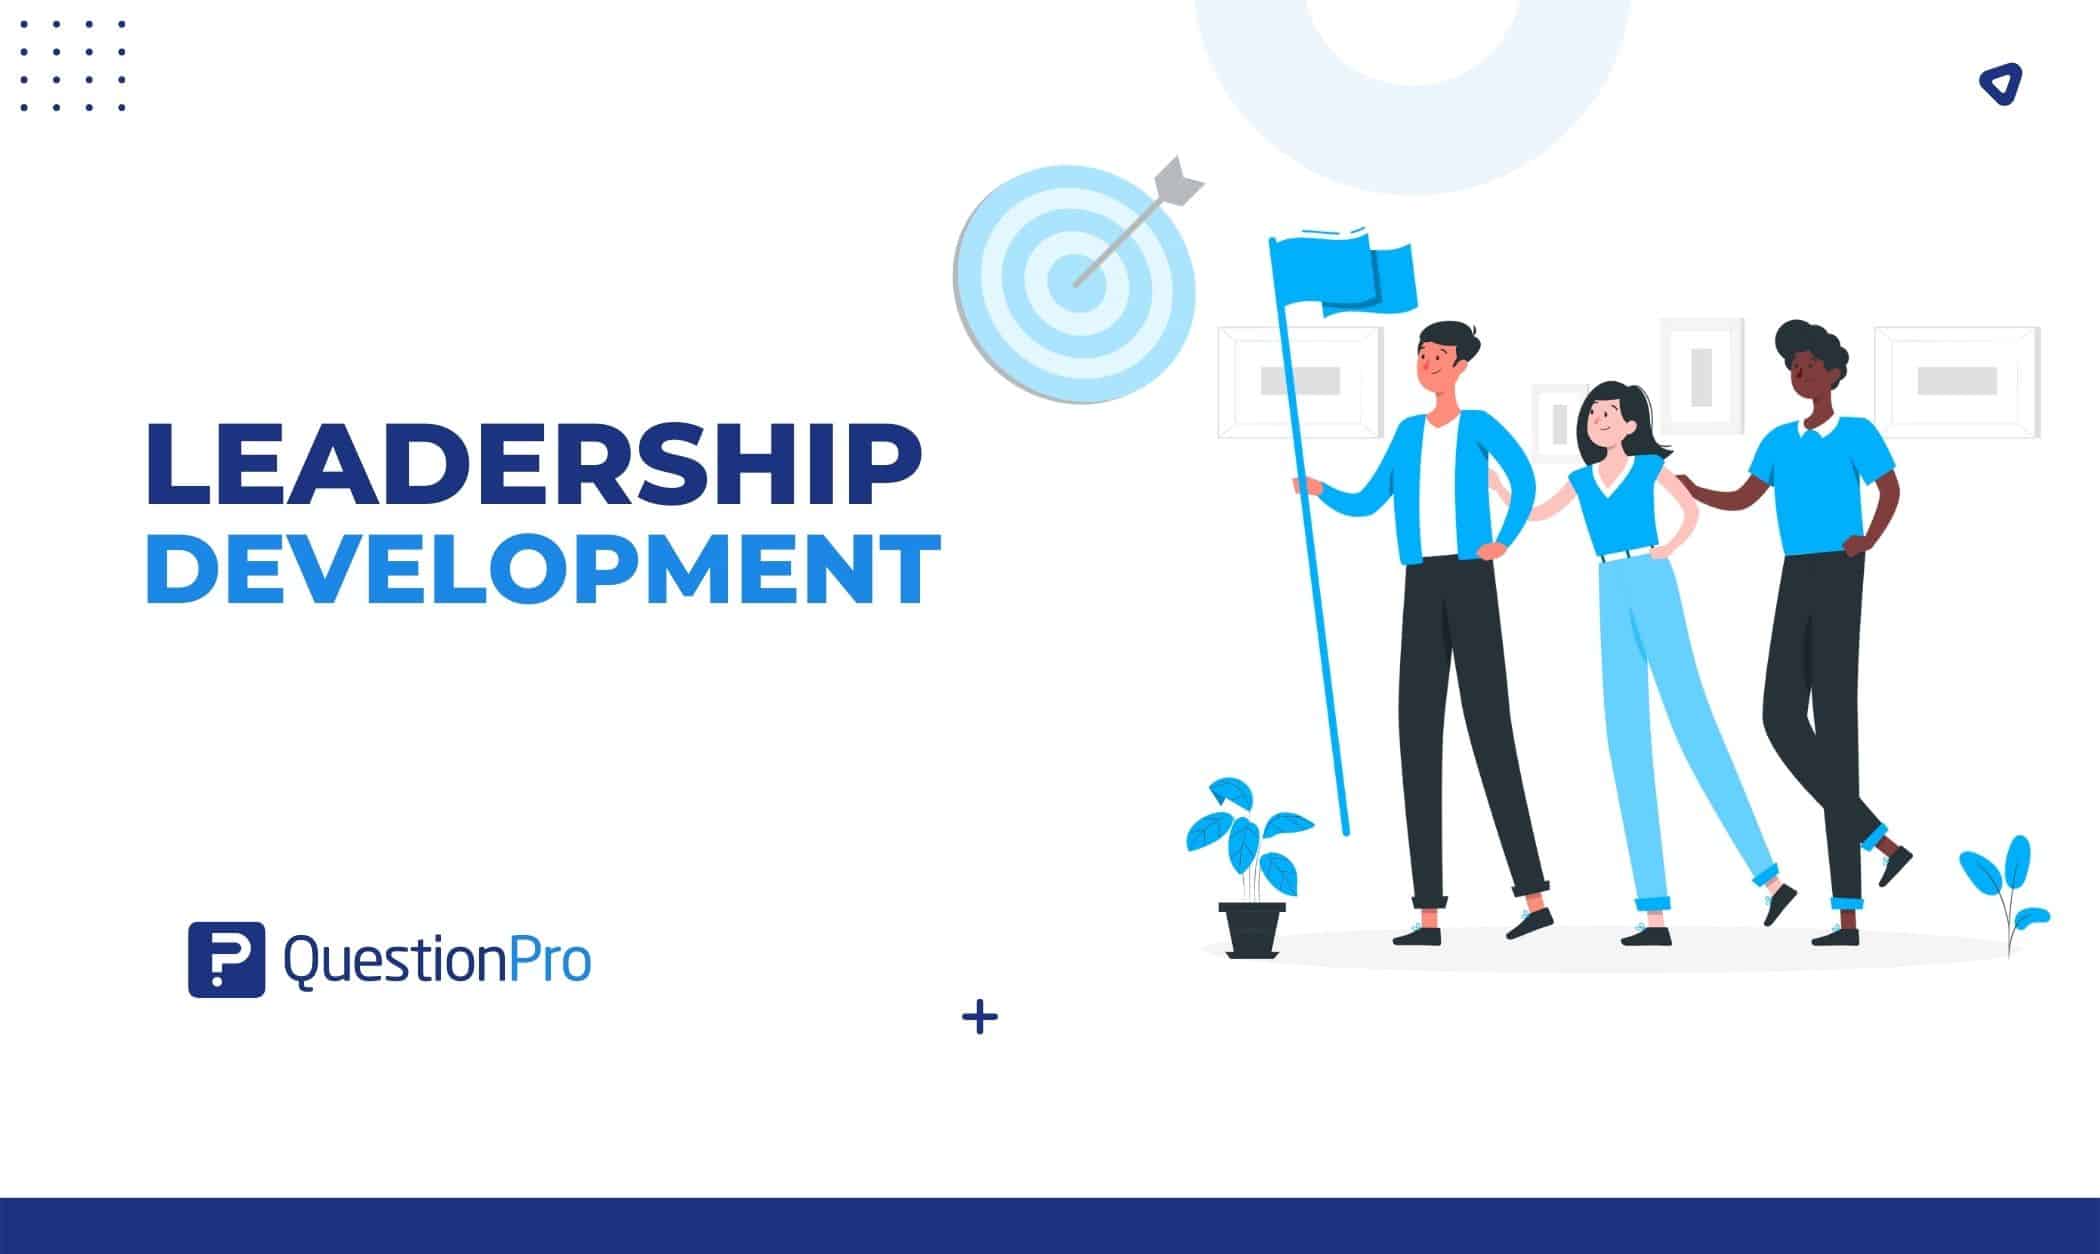 Leadership development increases an individual's capacity to serve in organizational leadership roles. Learn everything you need to know.